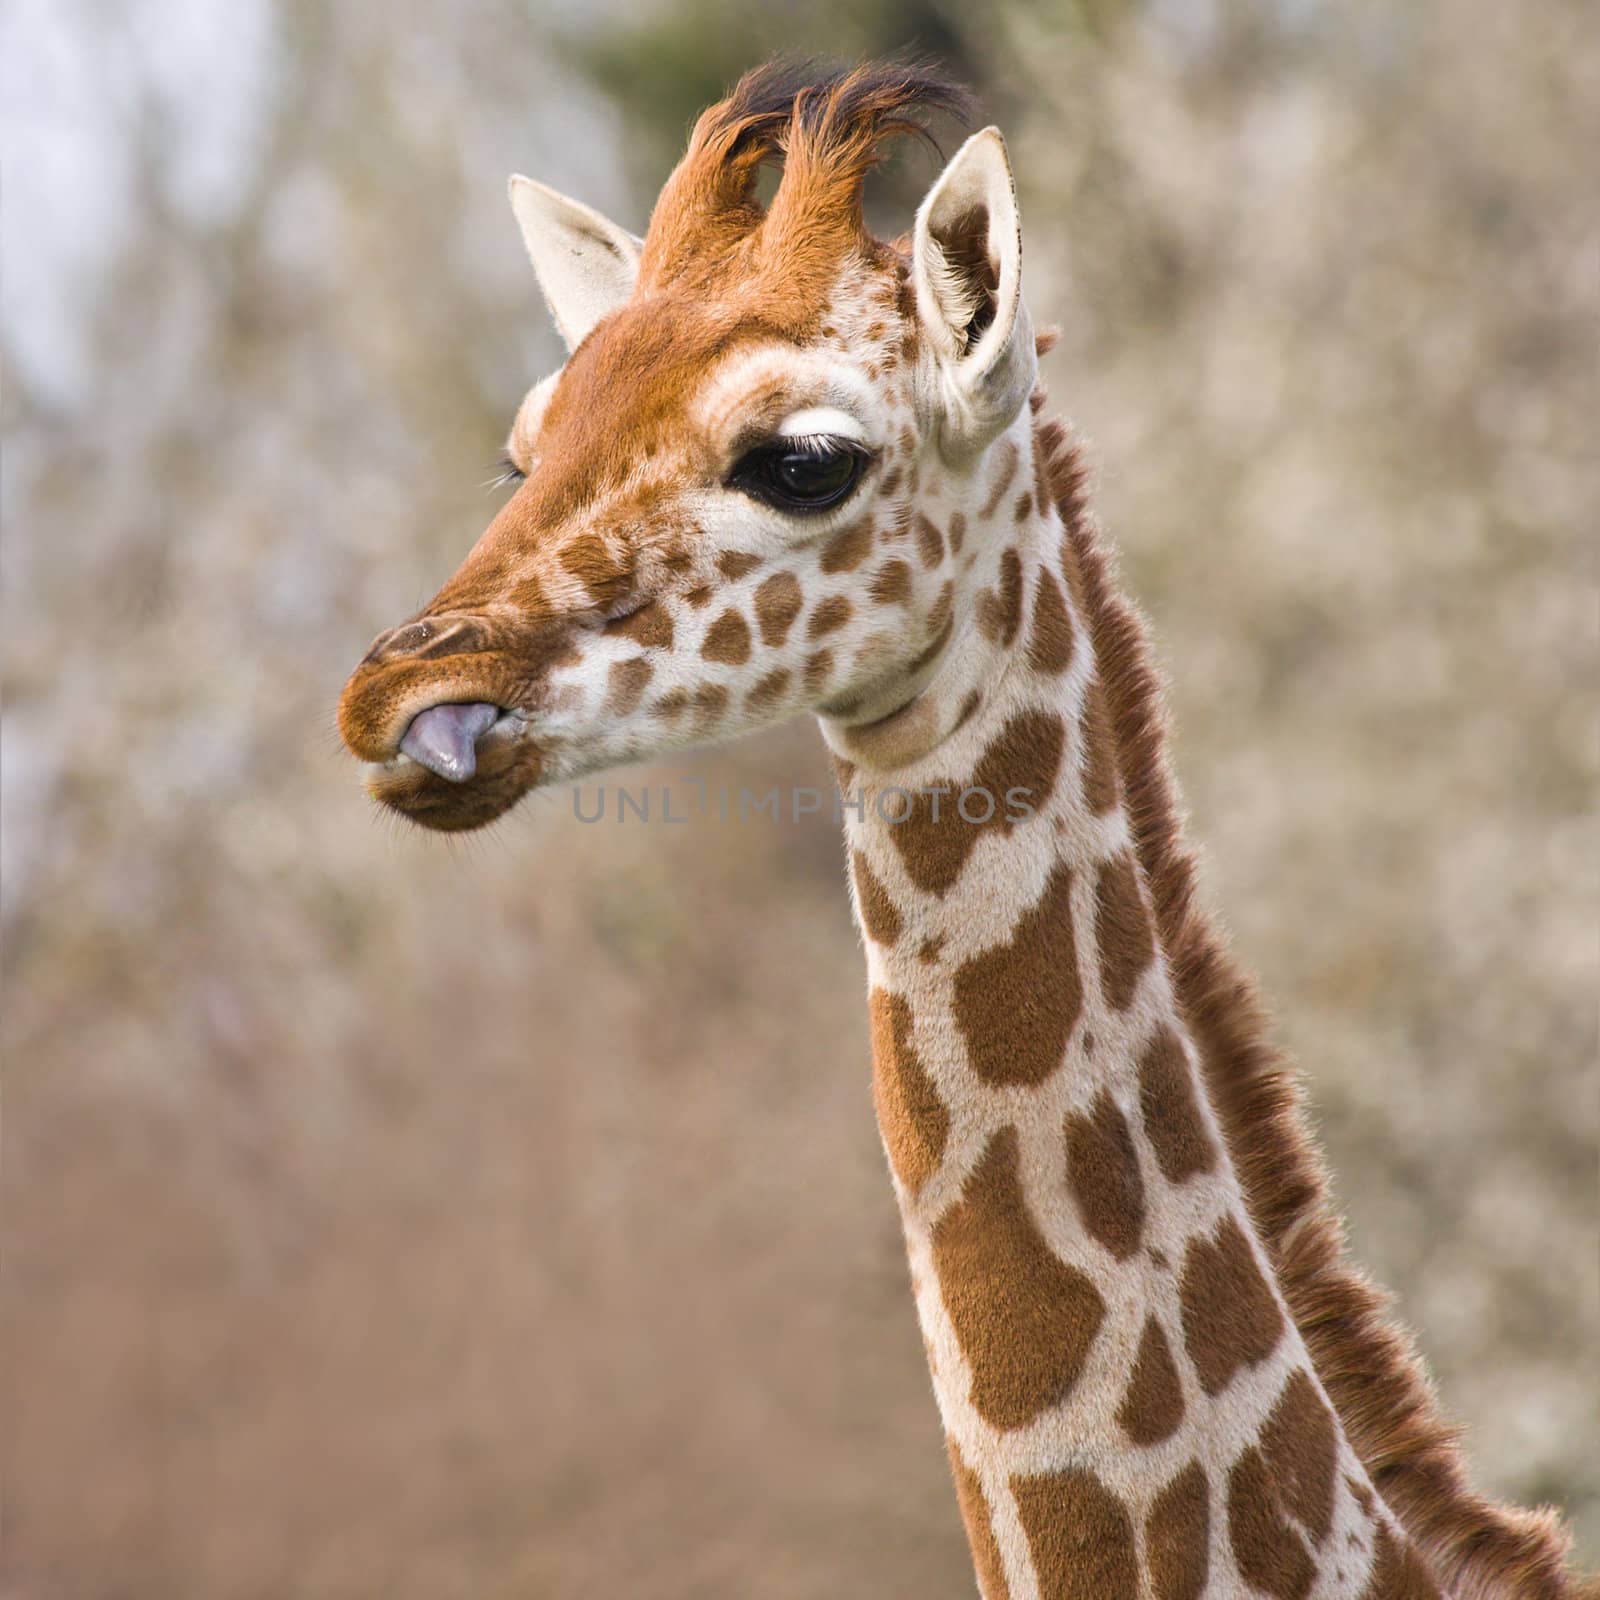 Baby giraffe portrait with tongue out of beak- square cropped image